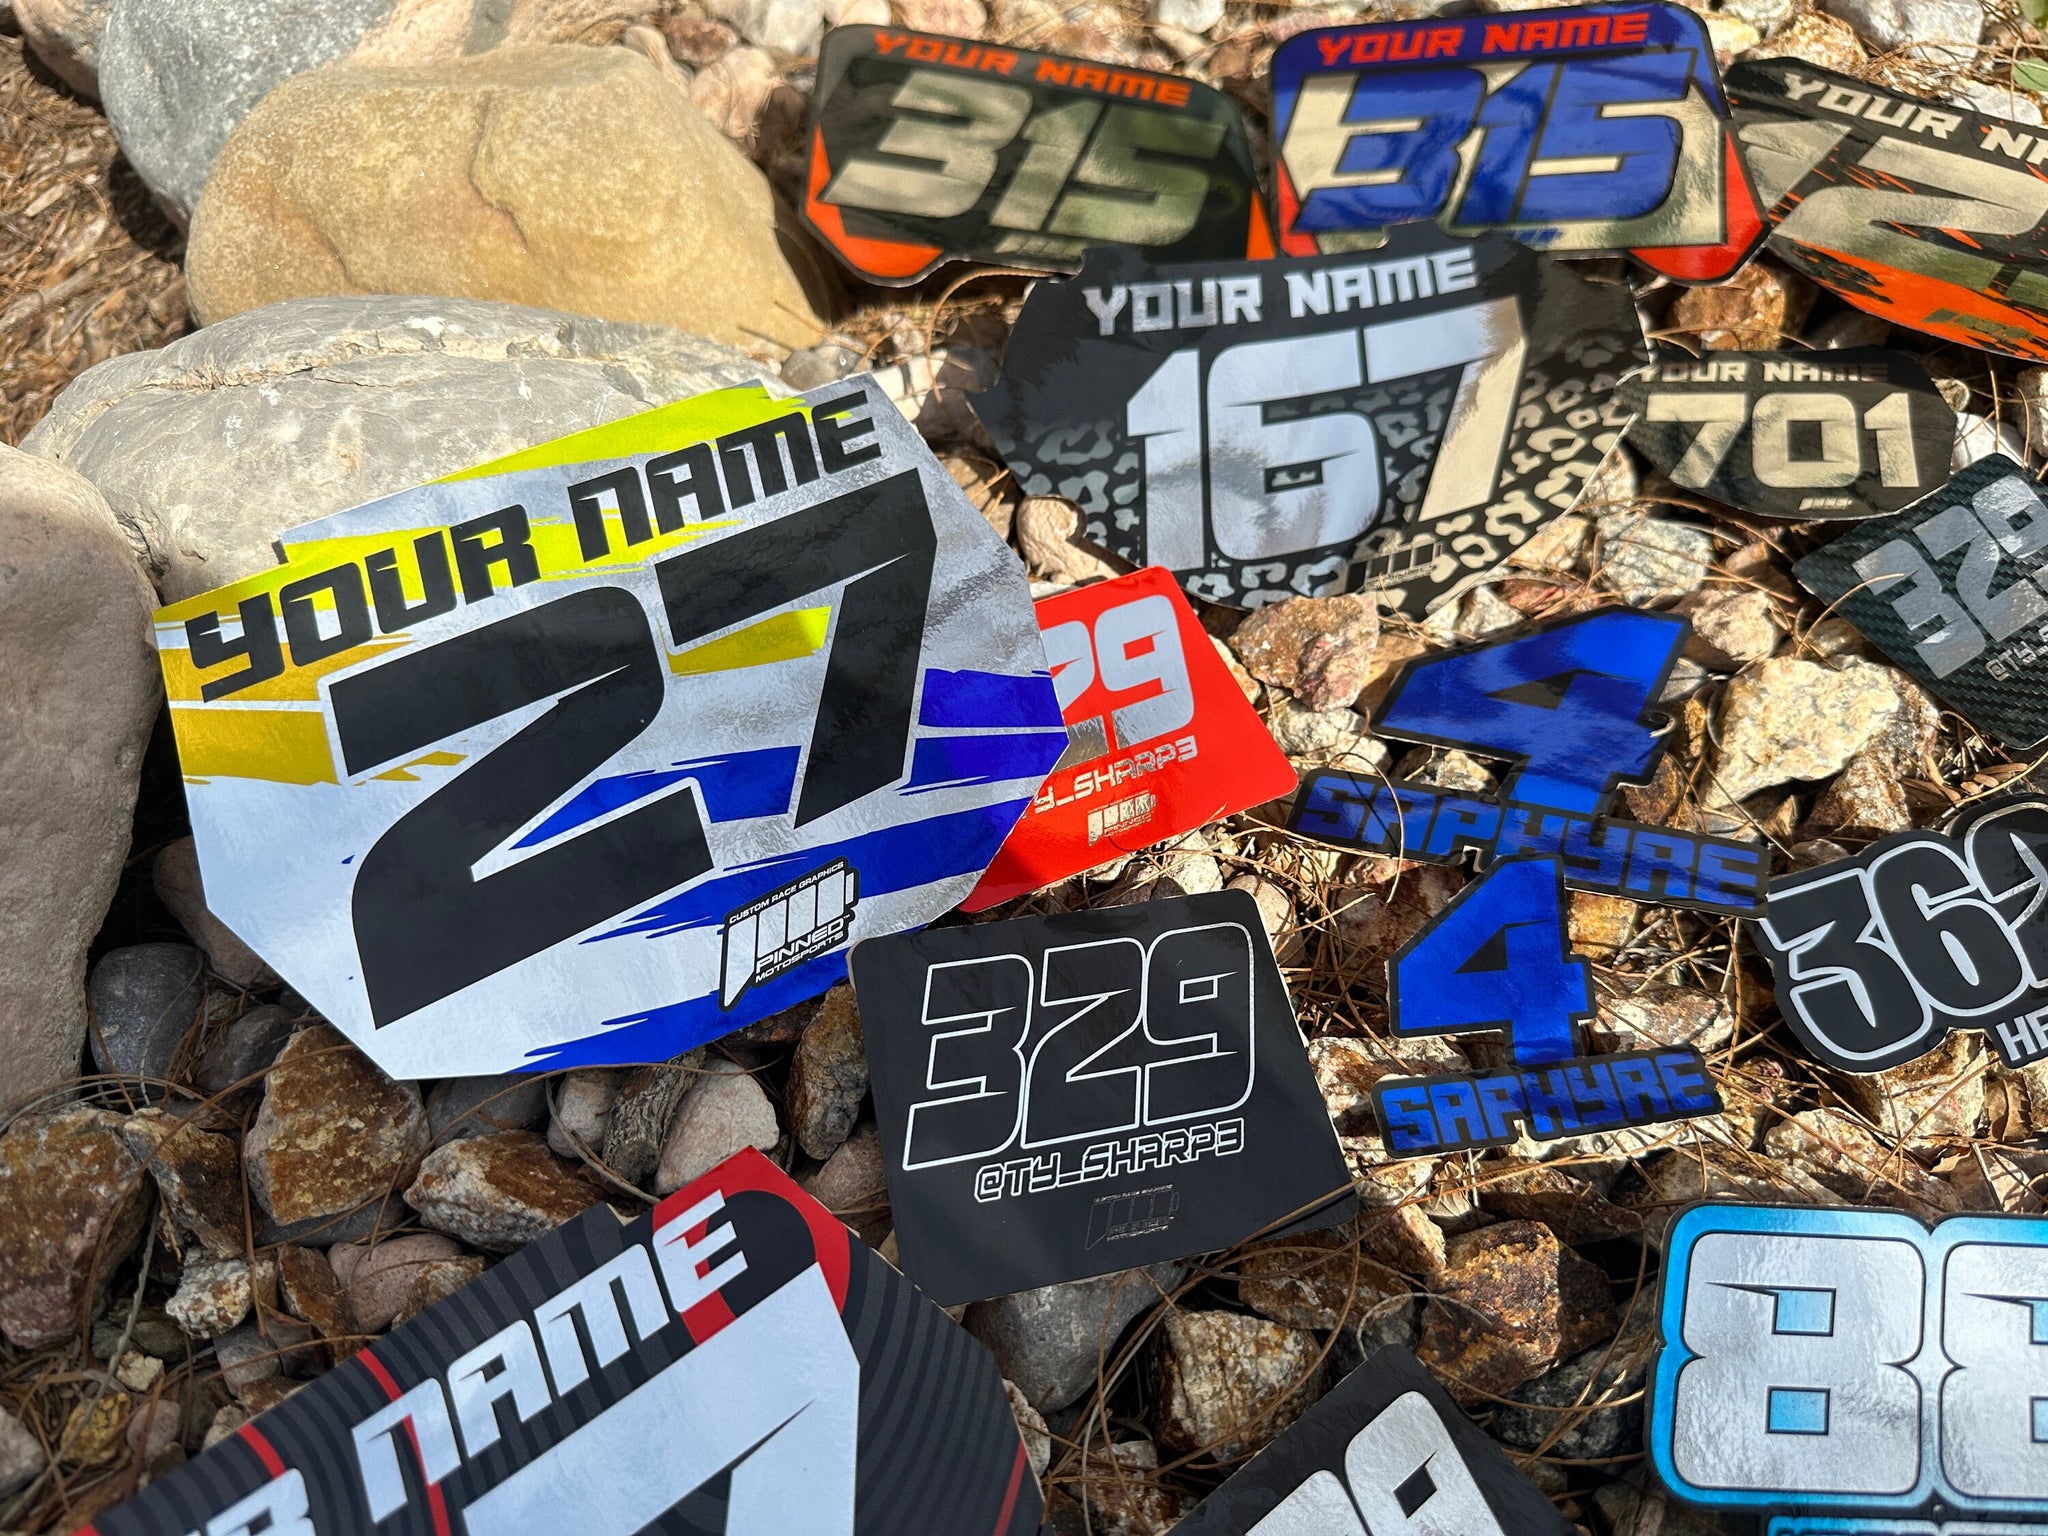 Chrome Mini Plate Decals, Metallic Number Plate decal, Chrome Motocross Plate Decals